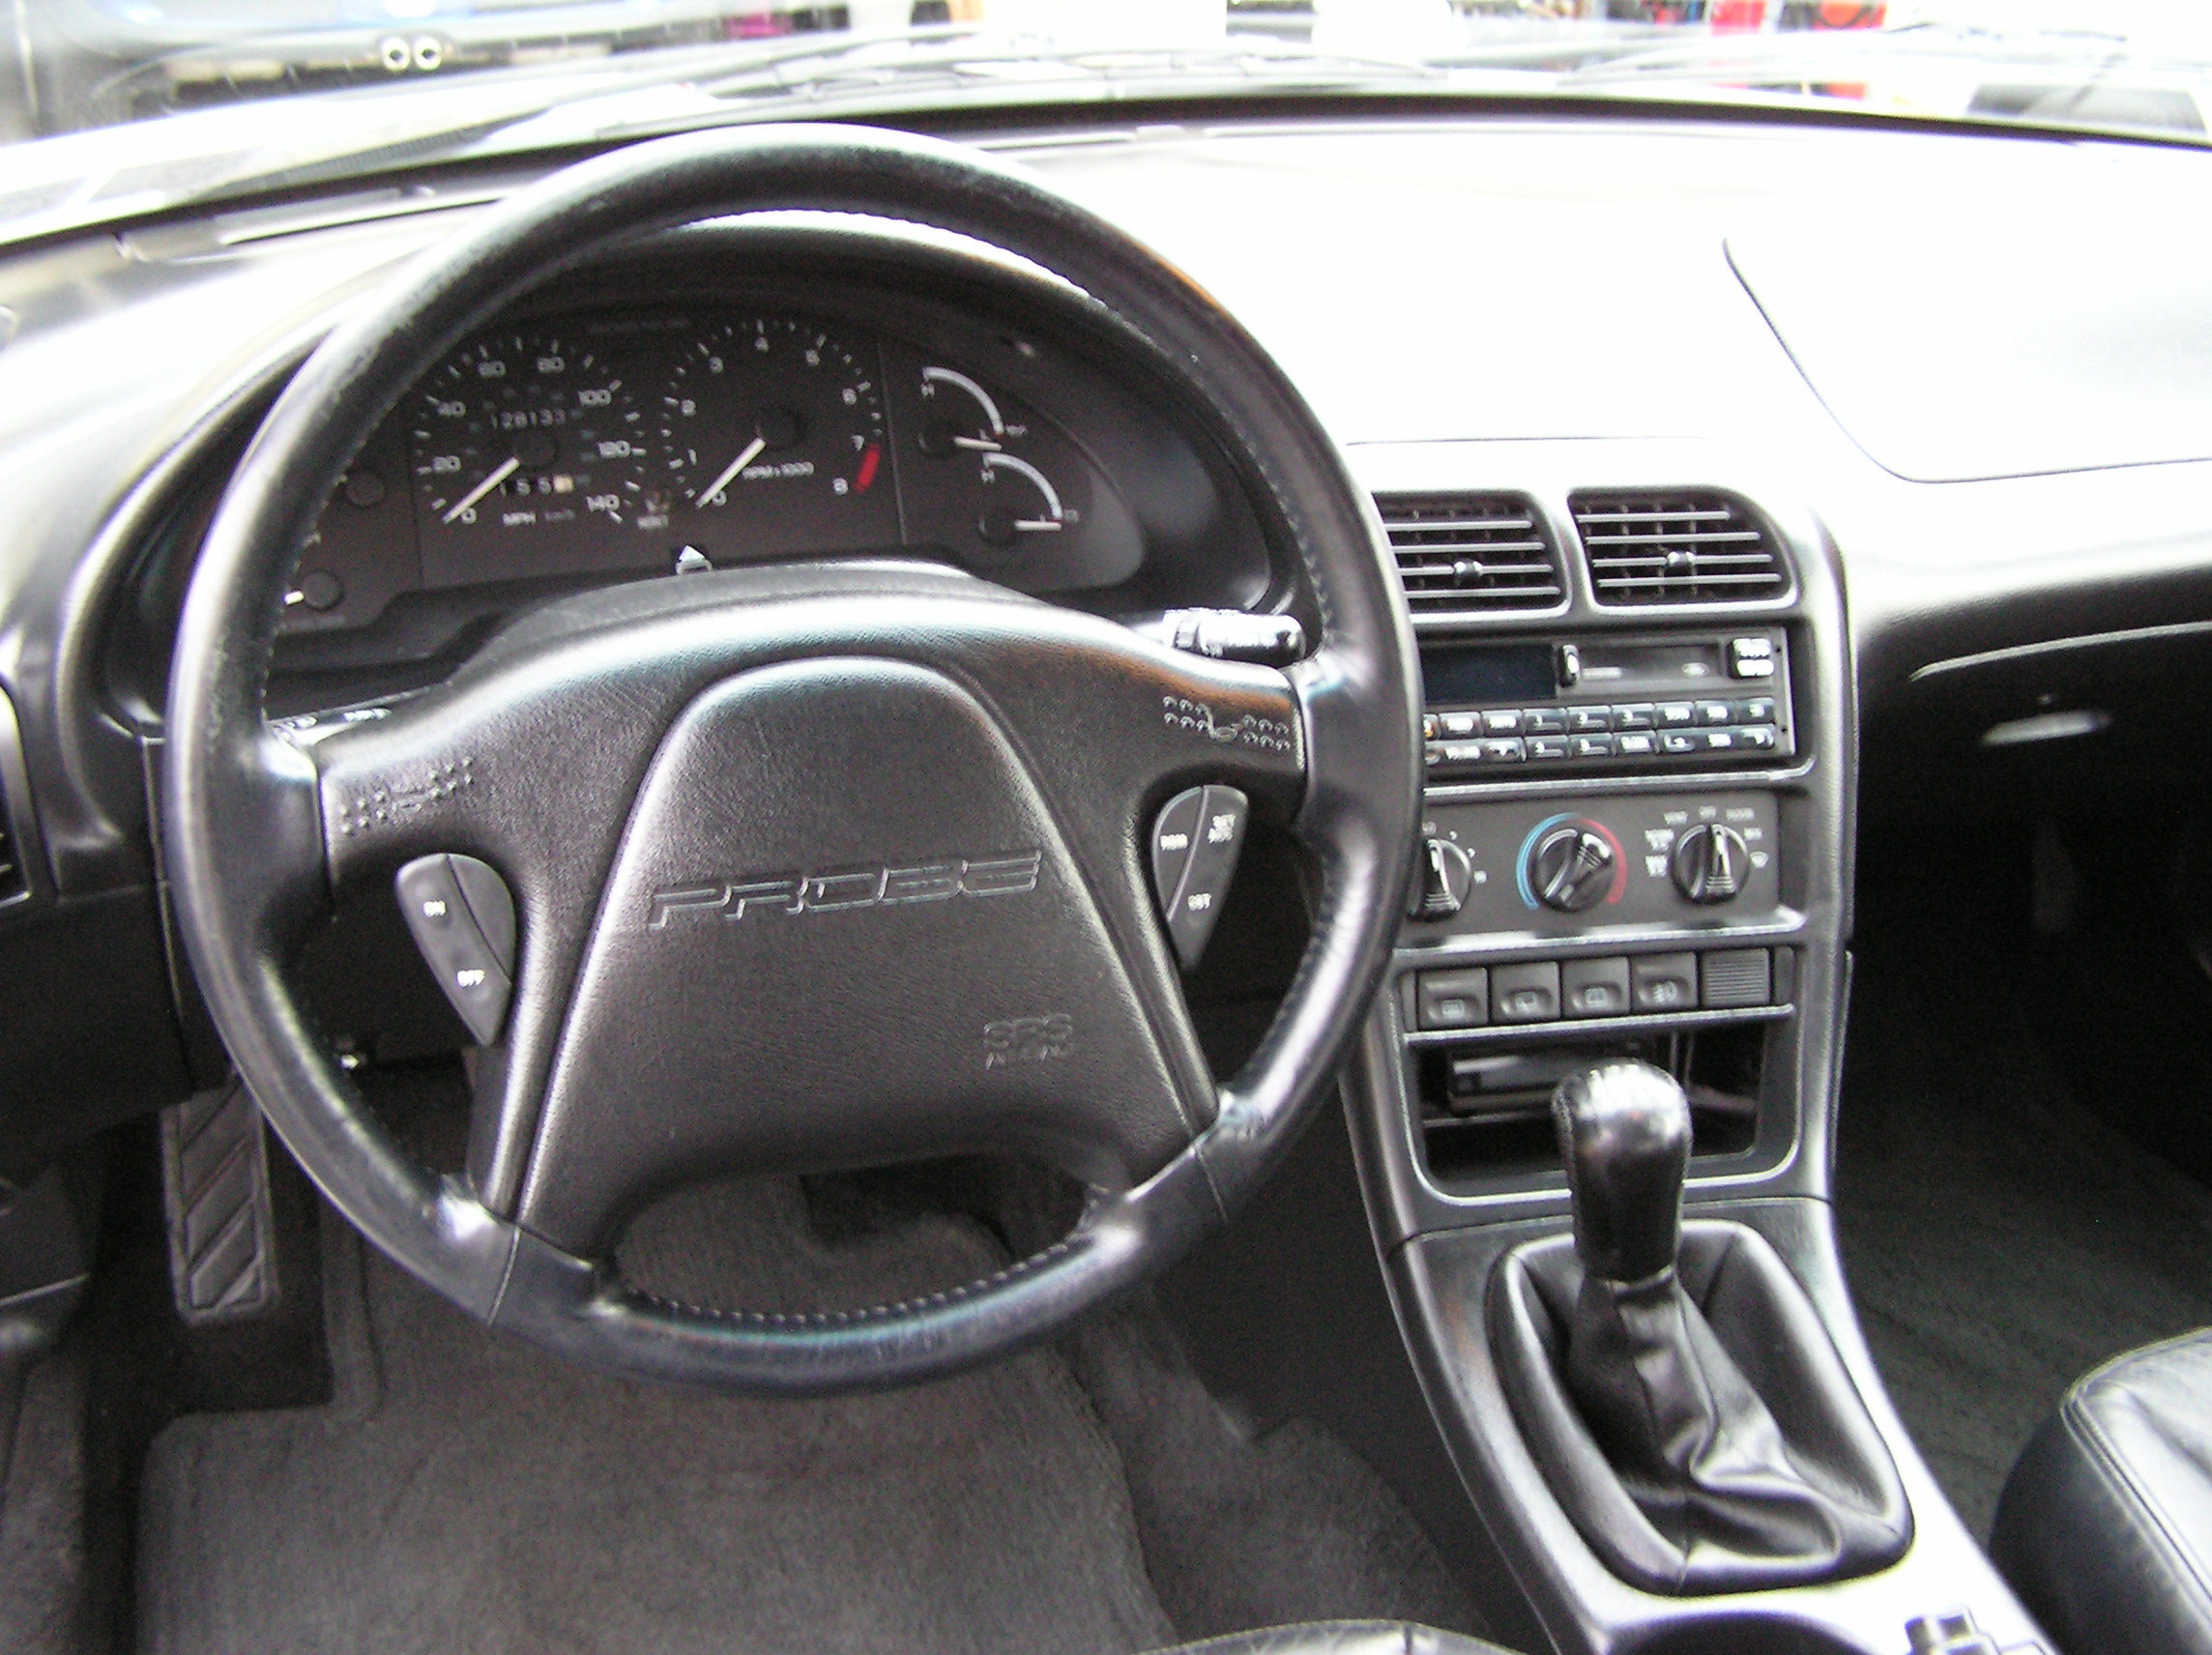 Ford Probe II 1992 - 1997 Coupe #6